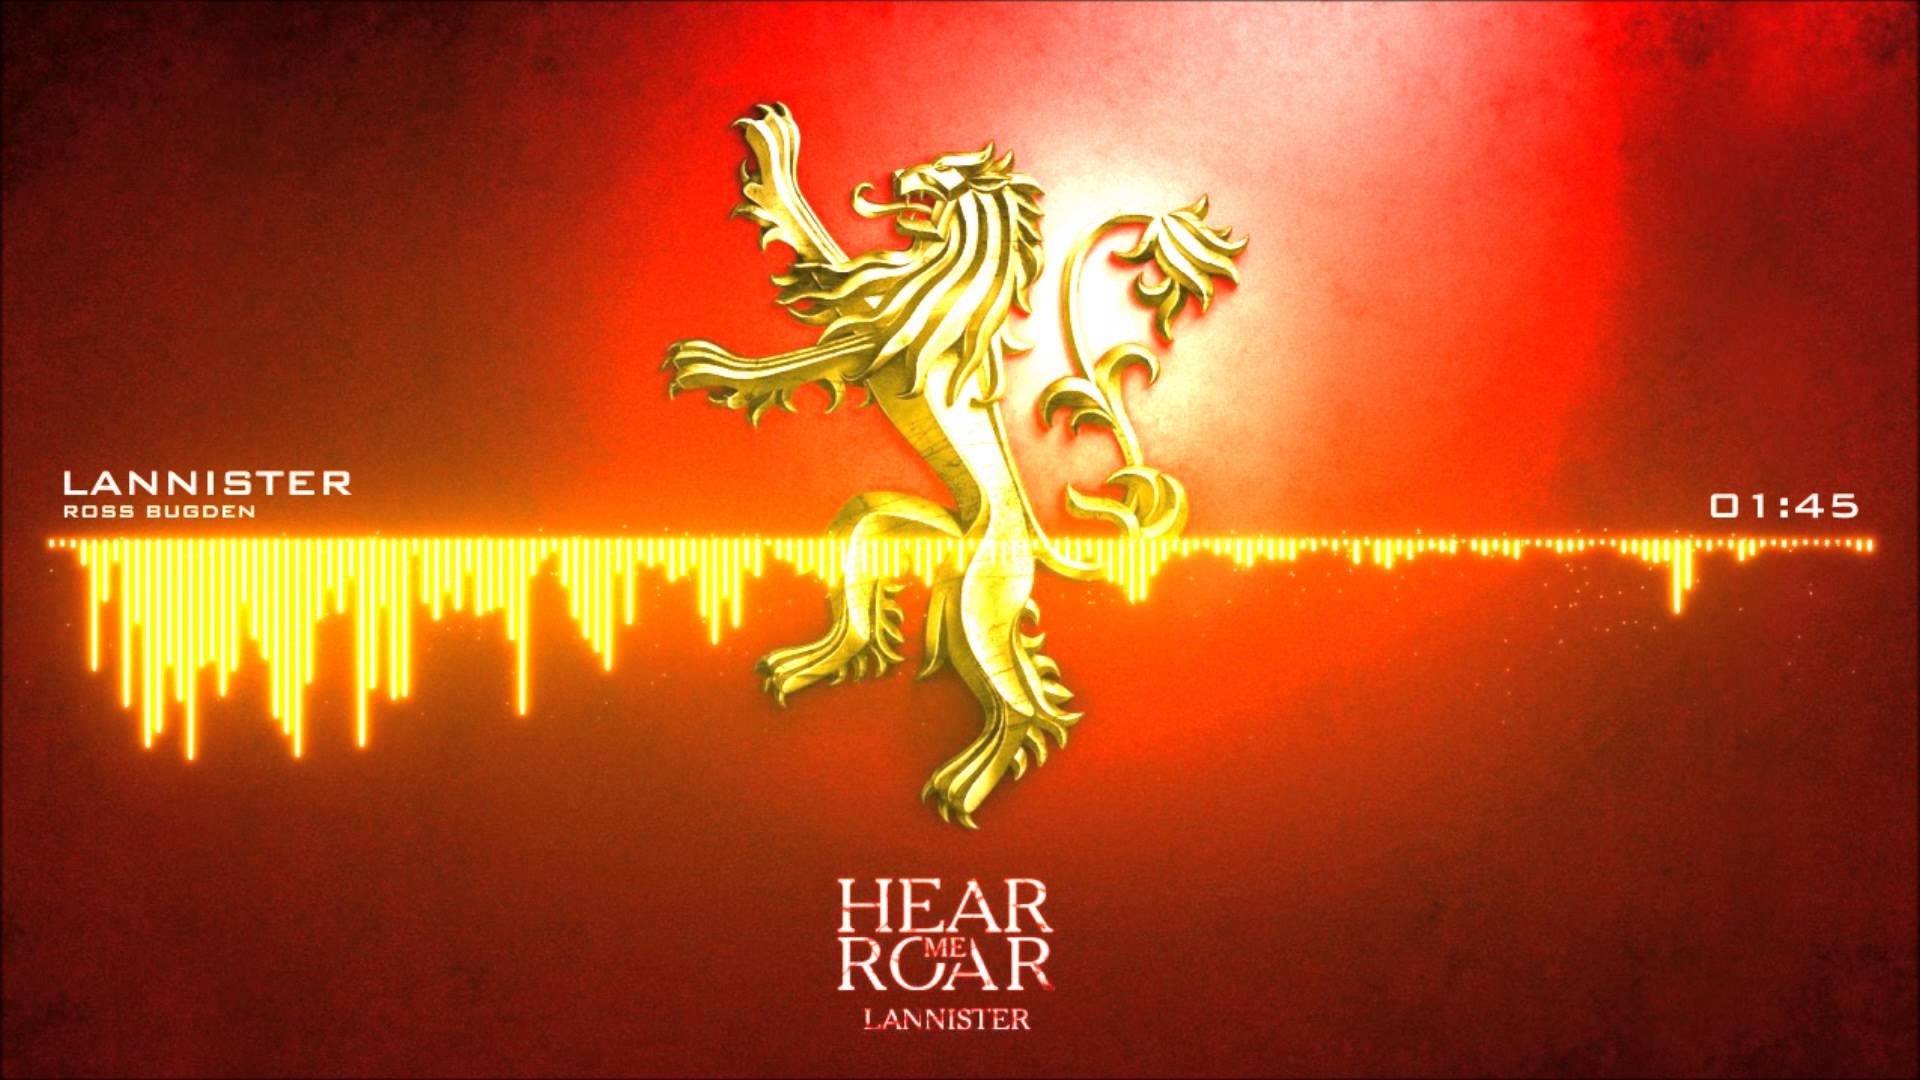 House Lannister Theme – Game of Thrones Season 4 Original Composition – YouTube